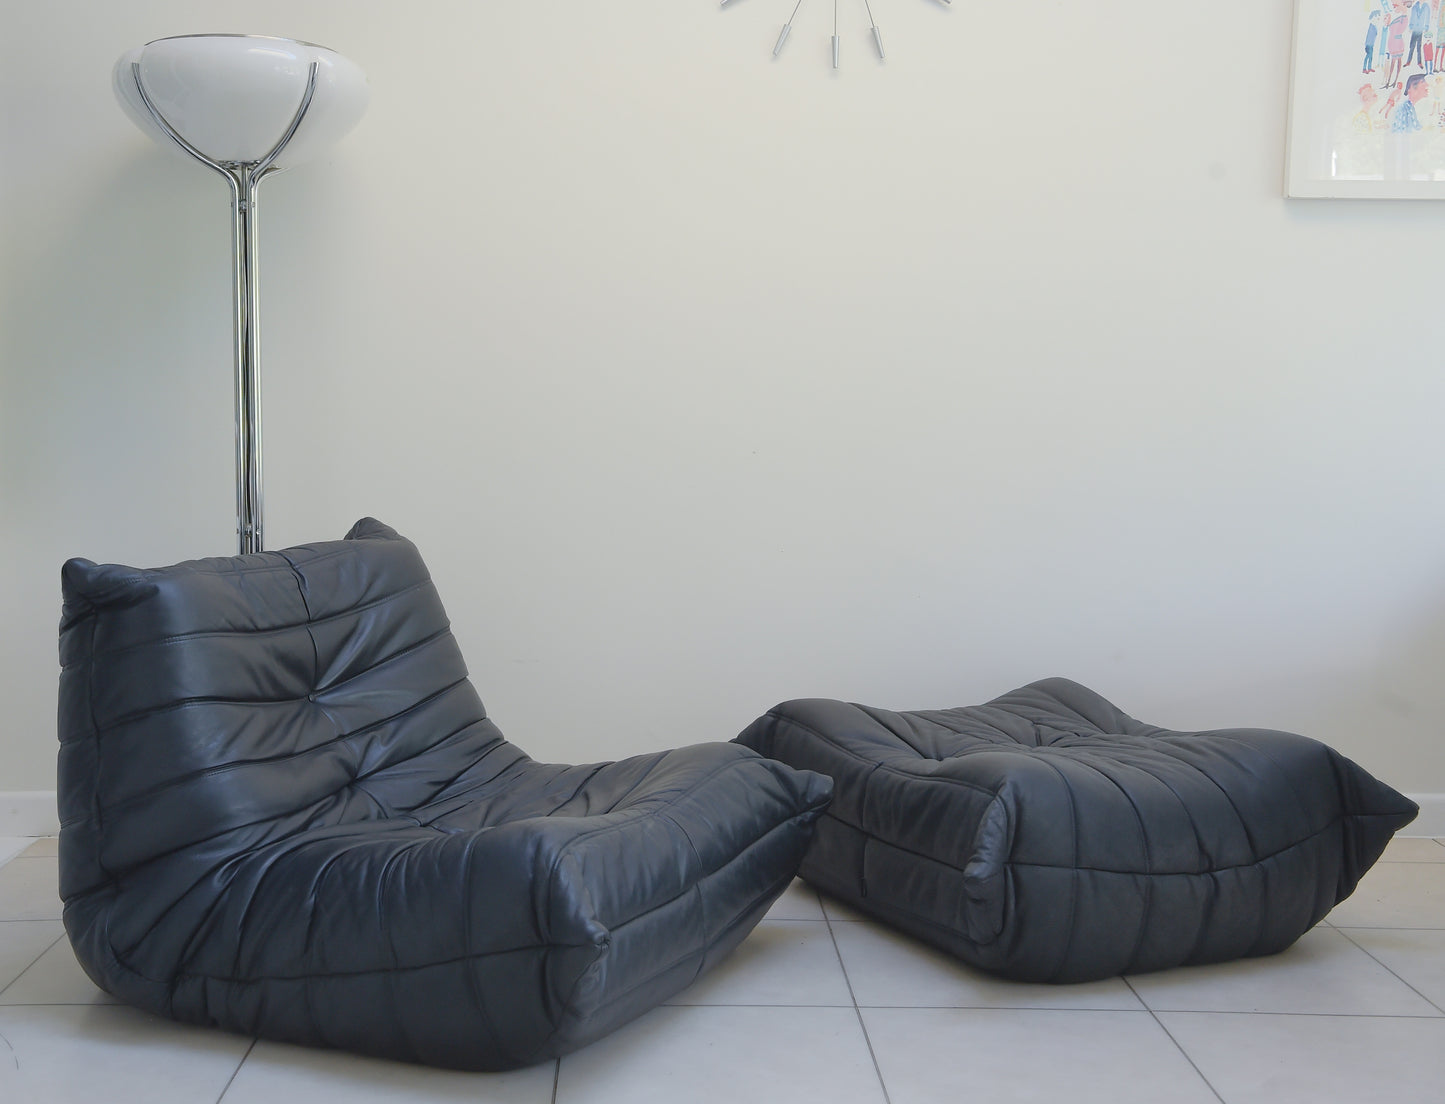 Vintage Leather Togo Chair And Footstool By Michel Ducaroy For Ligne Roset In Black Leather